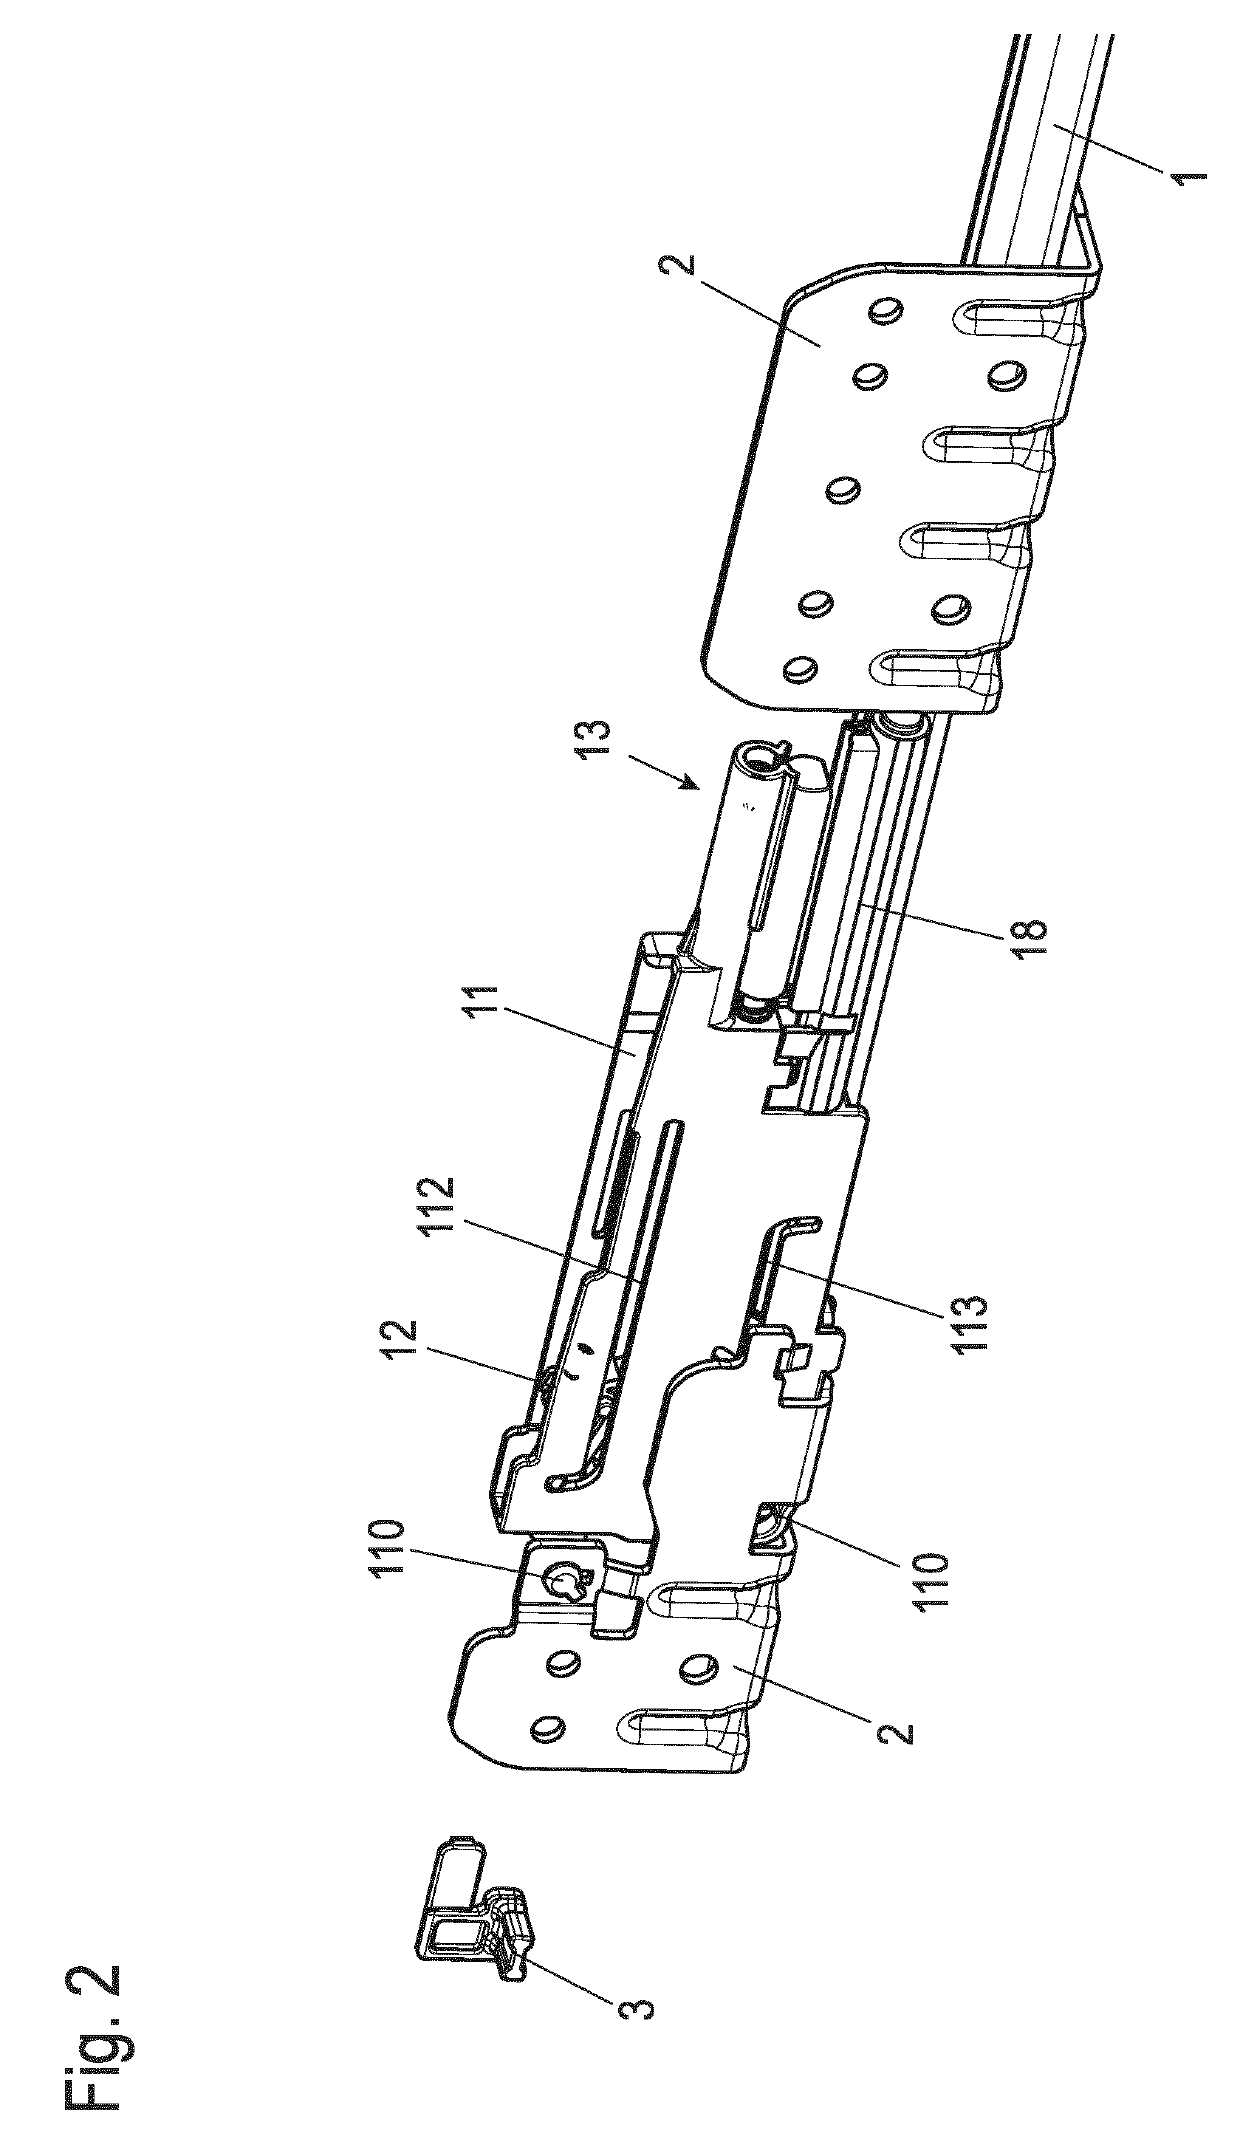 Self-retracting and damping device for a drawer element, and piece of furniture or domestic appliance having at least one drawer element